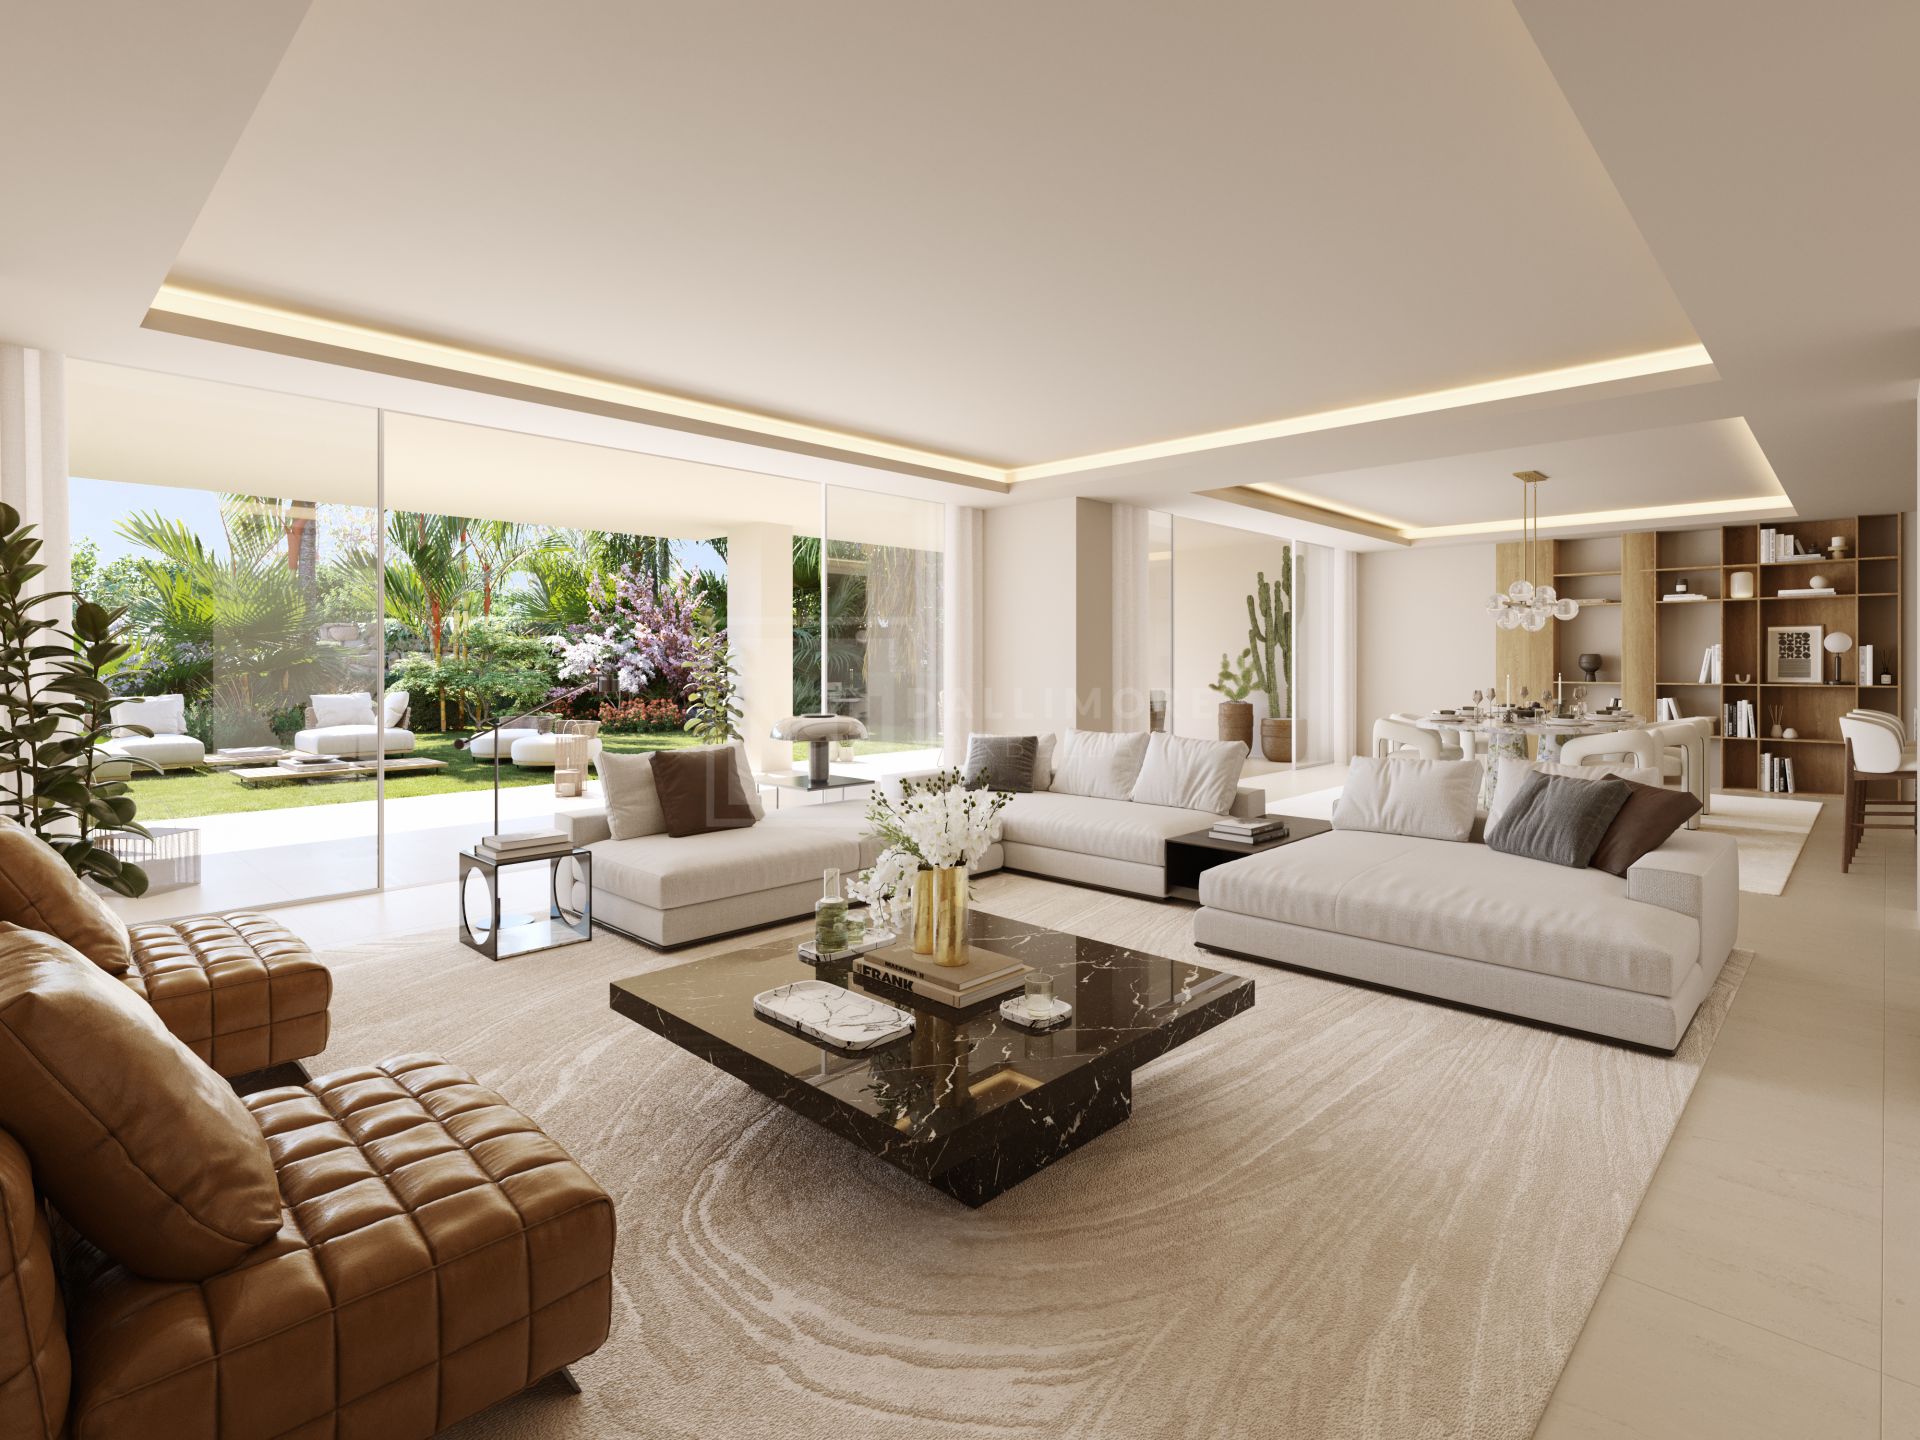 STRIKING NEW 3-BEDROOM CONTEMPORARY LUXURY PENTHOUSE, GOLDEN MILE, MARBELLA